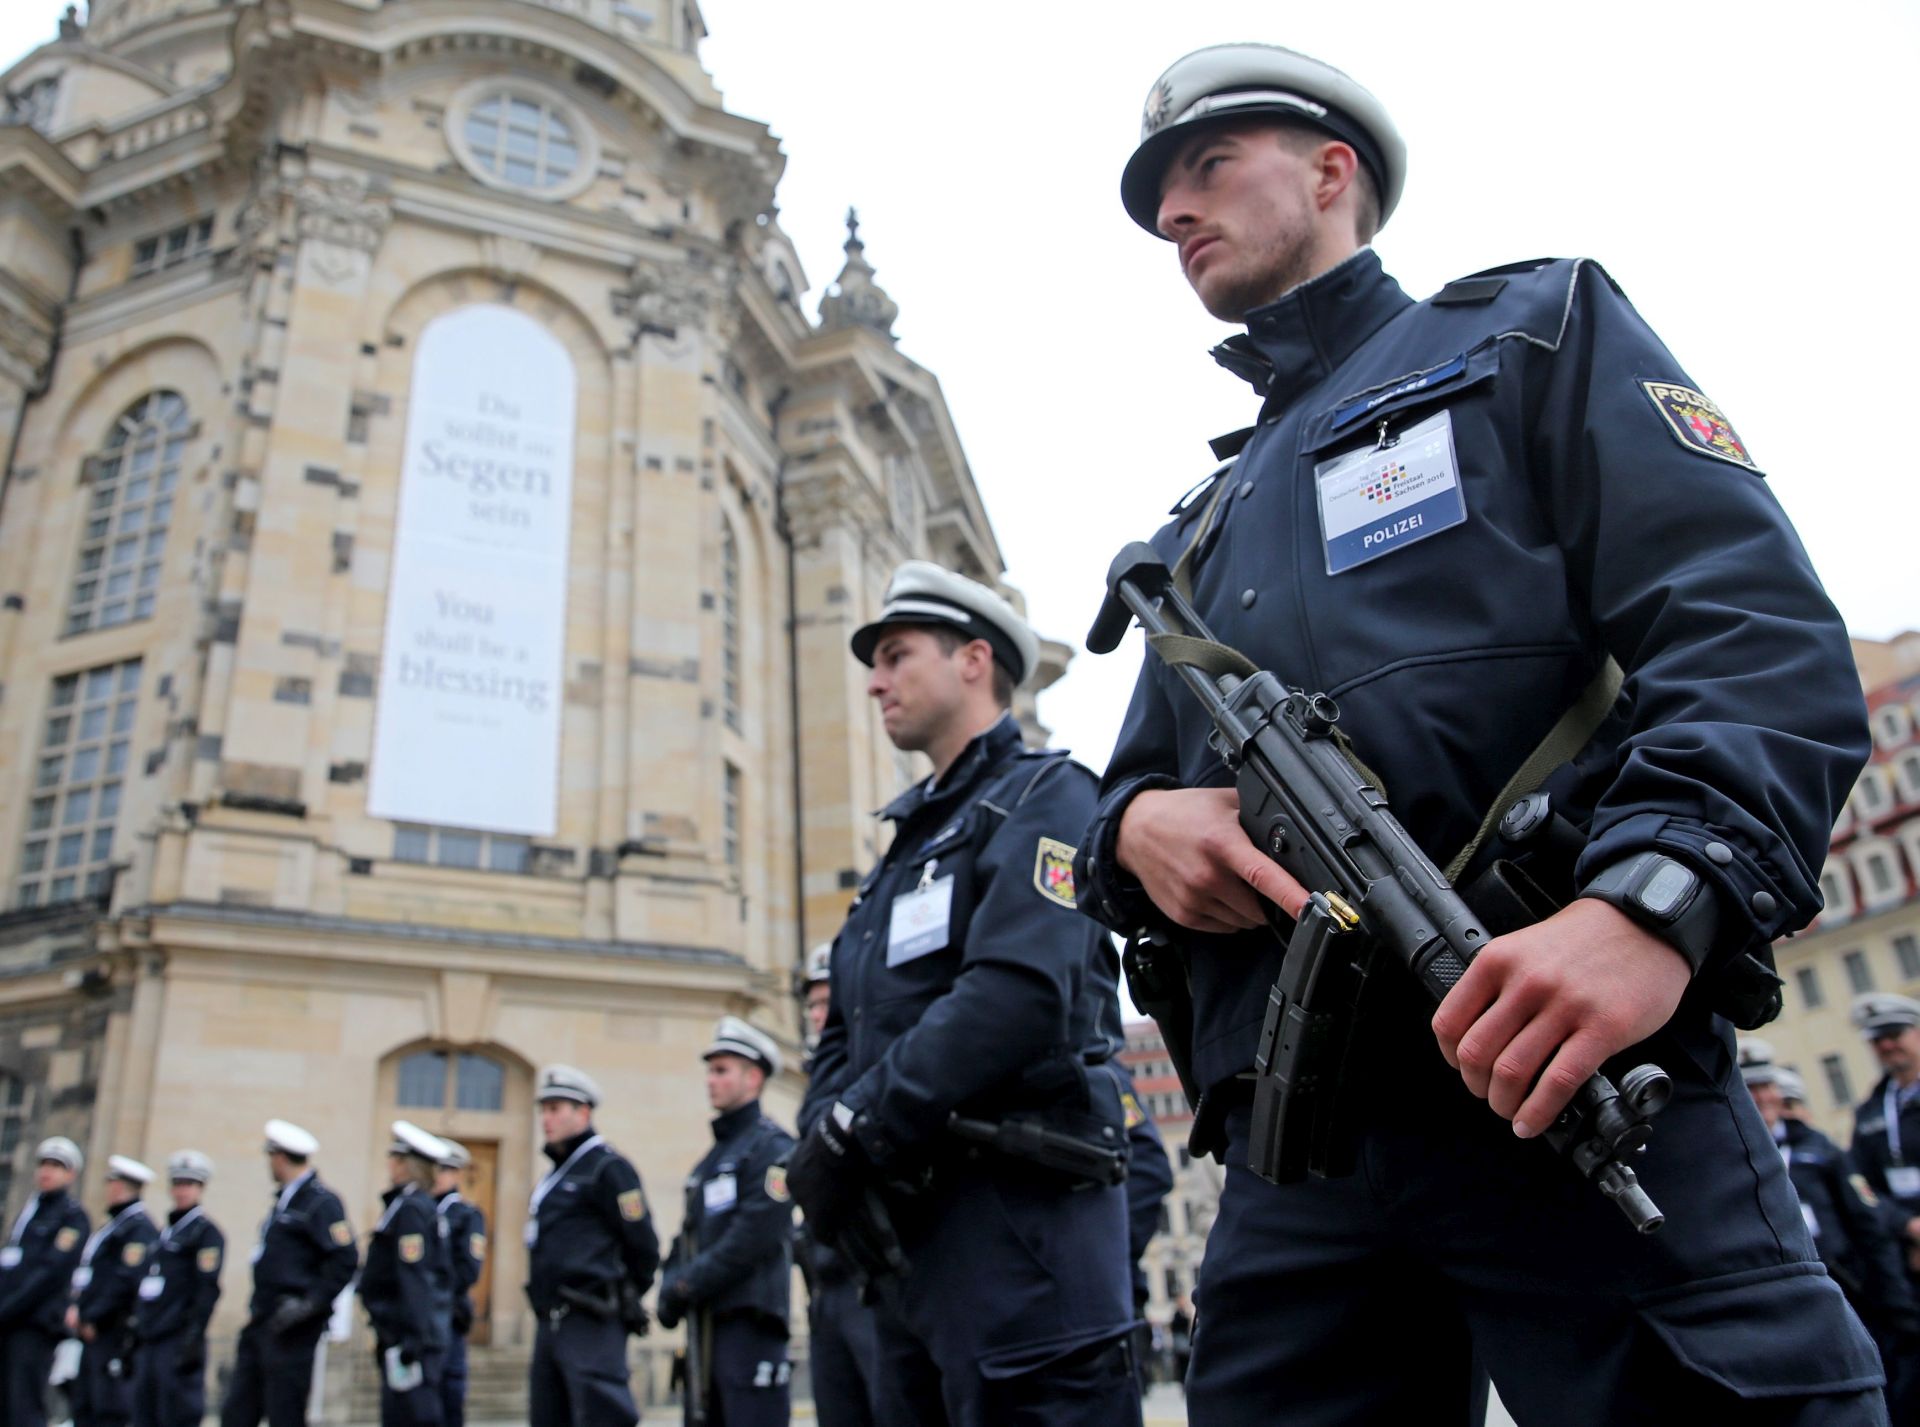 epa05567901 Armed German police secures the Neumarkt square in front of the 'Frauenkirche' (Church od Our Lady), in Dresden, Germany, 03 October 2016. The highest representatives of the state, including German President Gauck, 'Bundestag' parliament president Lammert, German Chancellor Merkel and Constitutional Court President Vosskuhle are expected in Dresden for this year's central celebrations to mark the 26th anniversary of the nation's peaceful reunification, known as the 'Day of German Unity', in Dresden on 03 October 2016.  EPA/JAN WOITAS